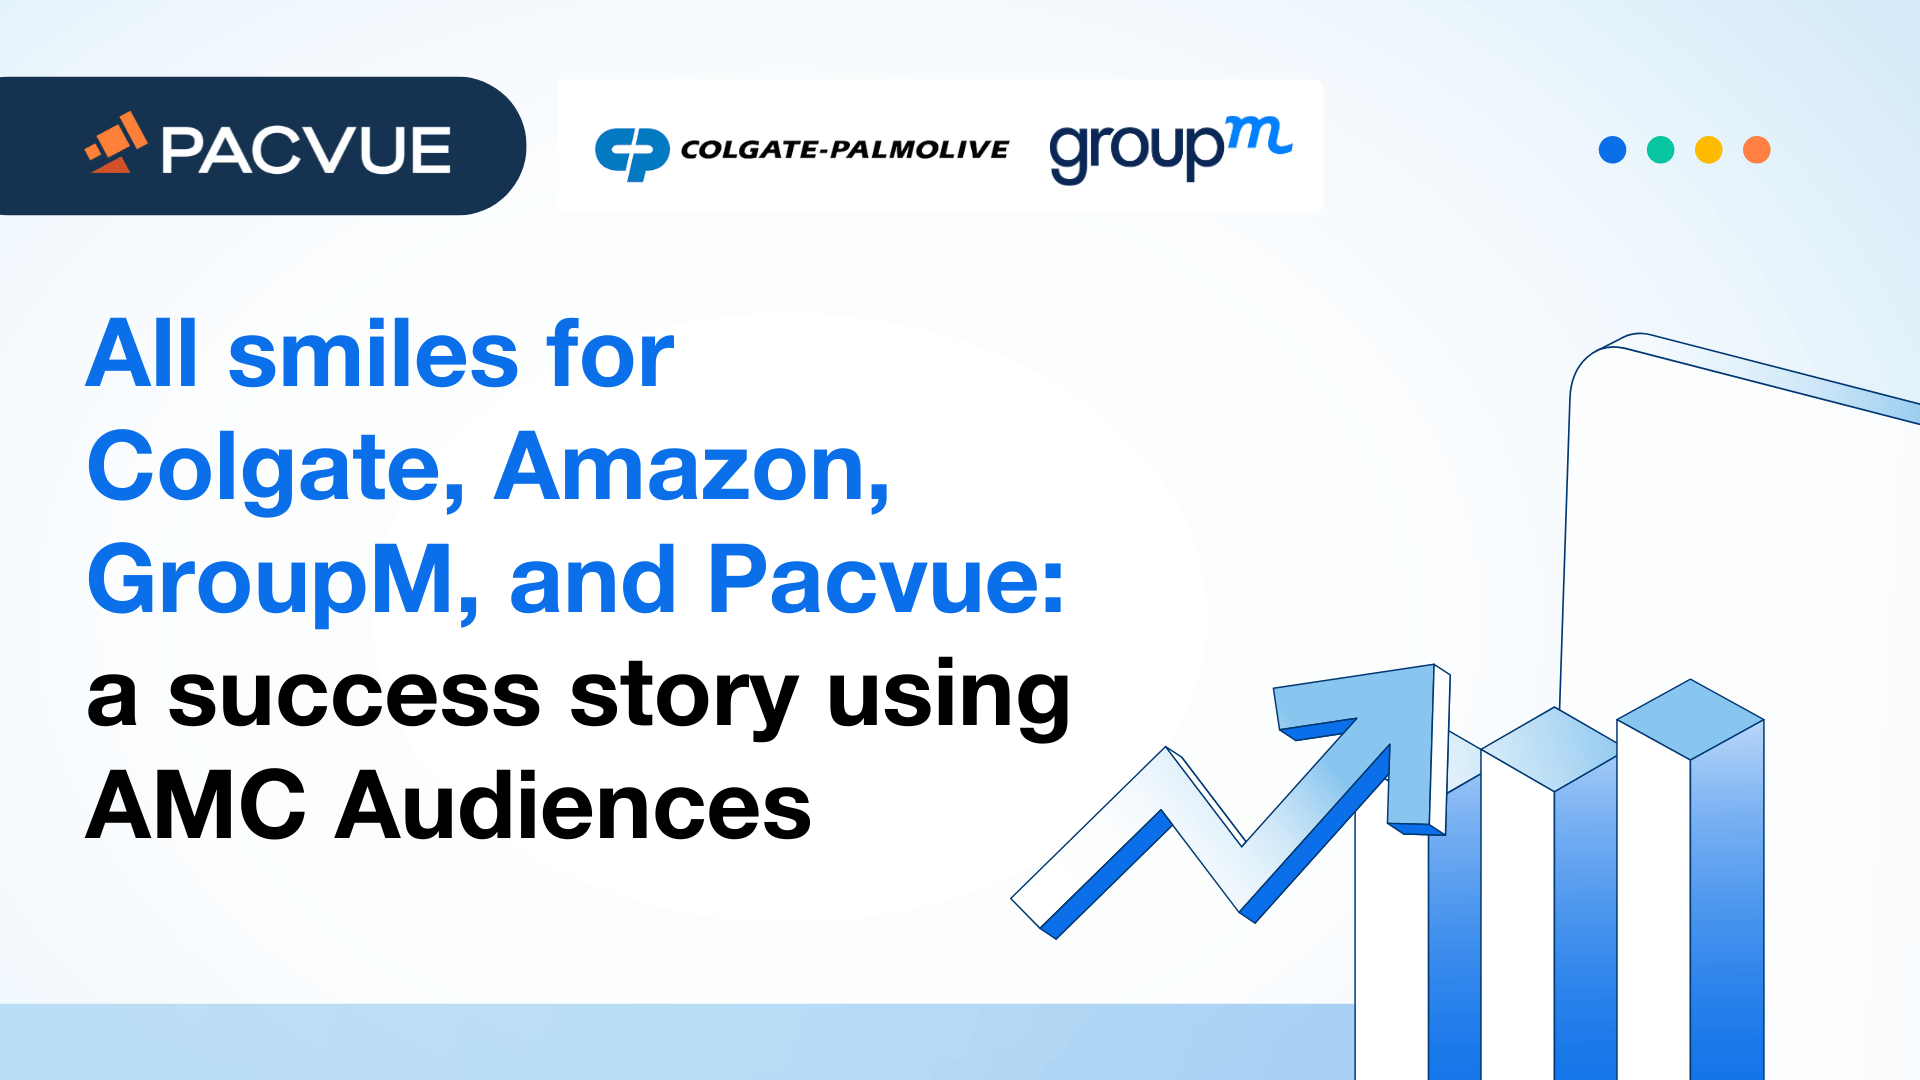 All smiles for Colgate, Amazon, GroupM, and Pacvue: a success story using AMC Audiences 